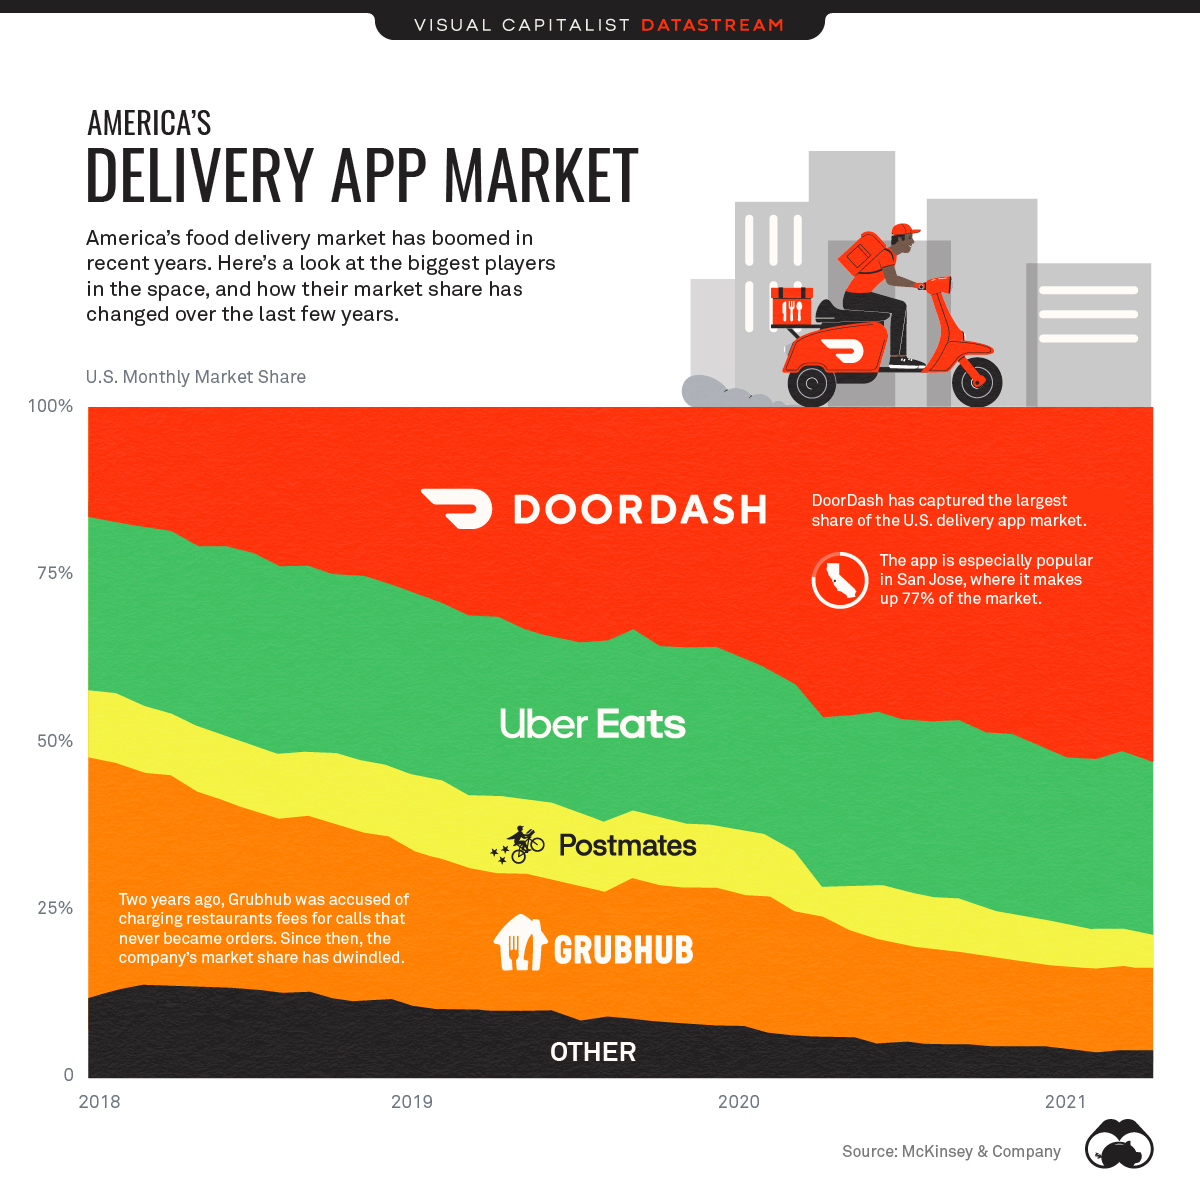 area graph shows doordash capturing an increasingly large share of the u.s. delivery app market